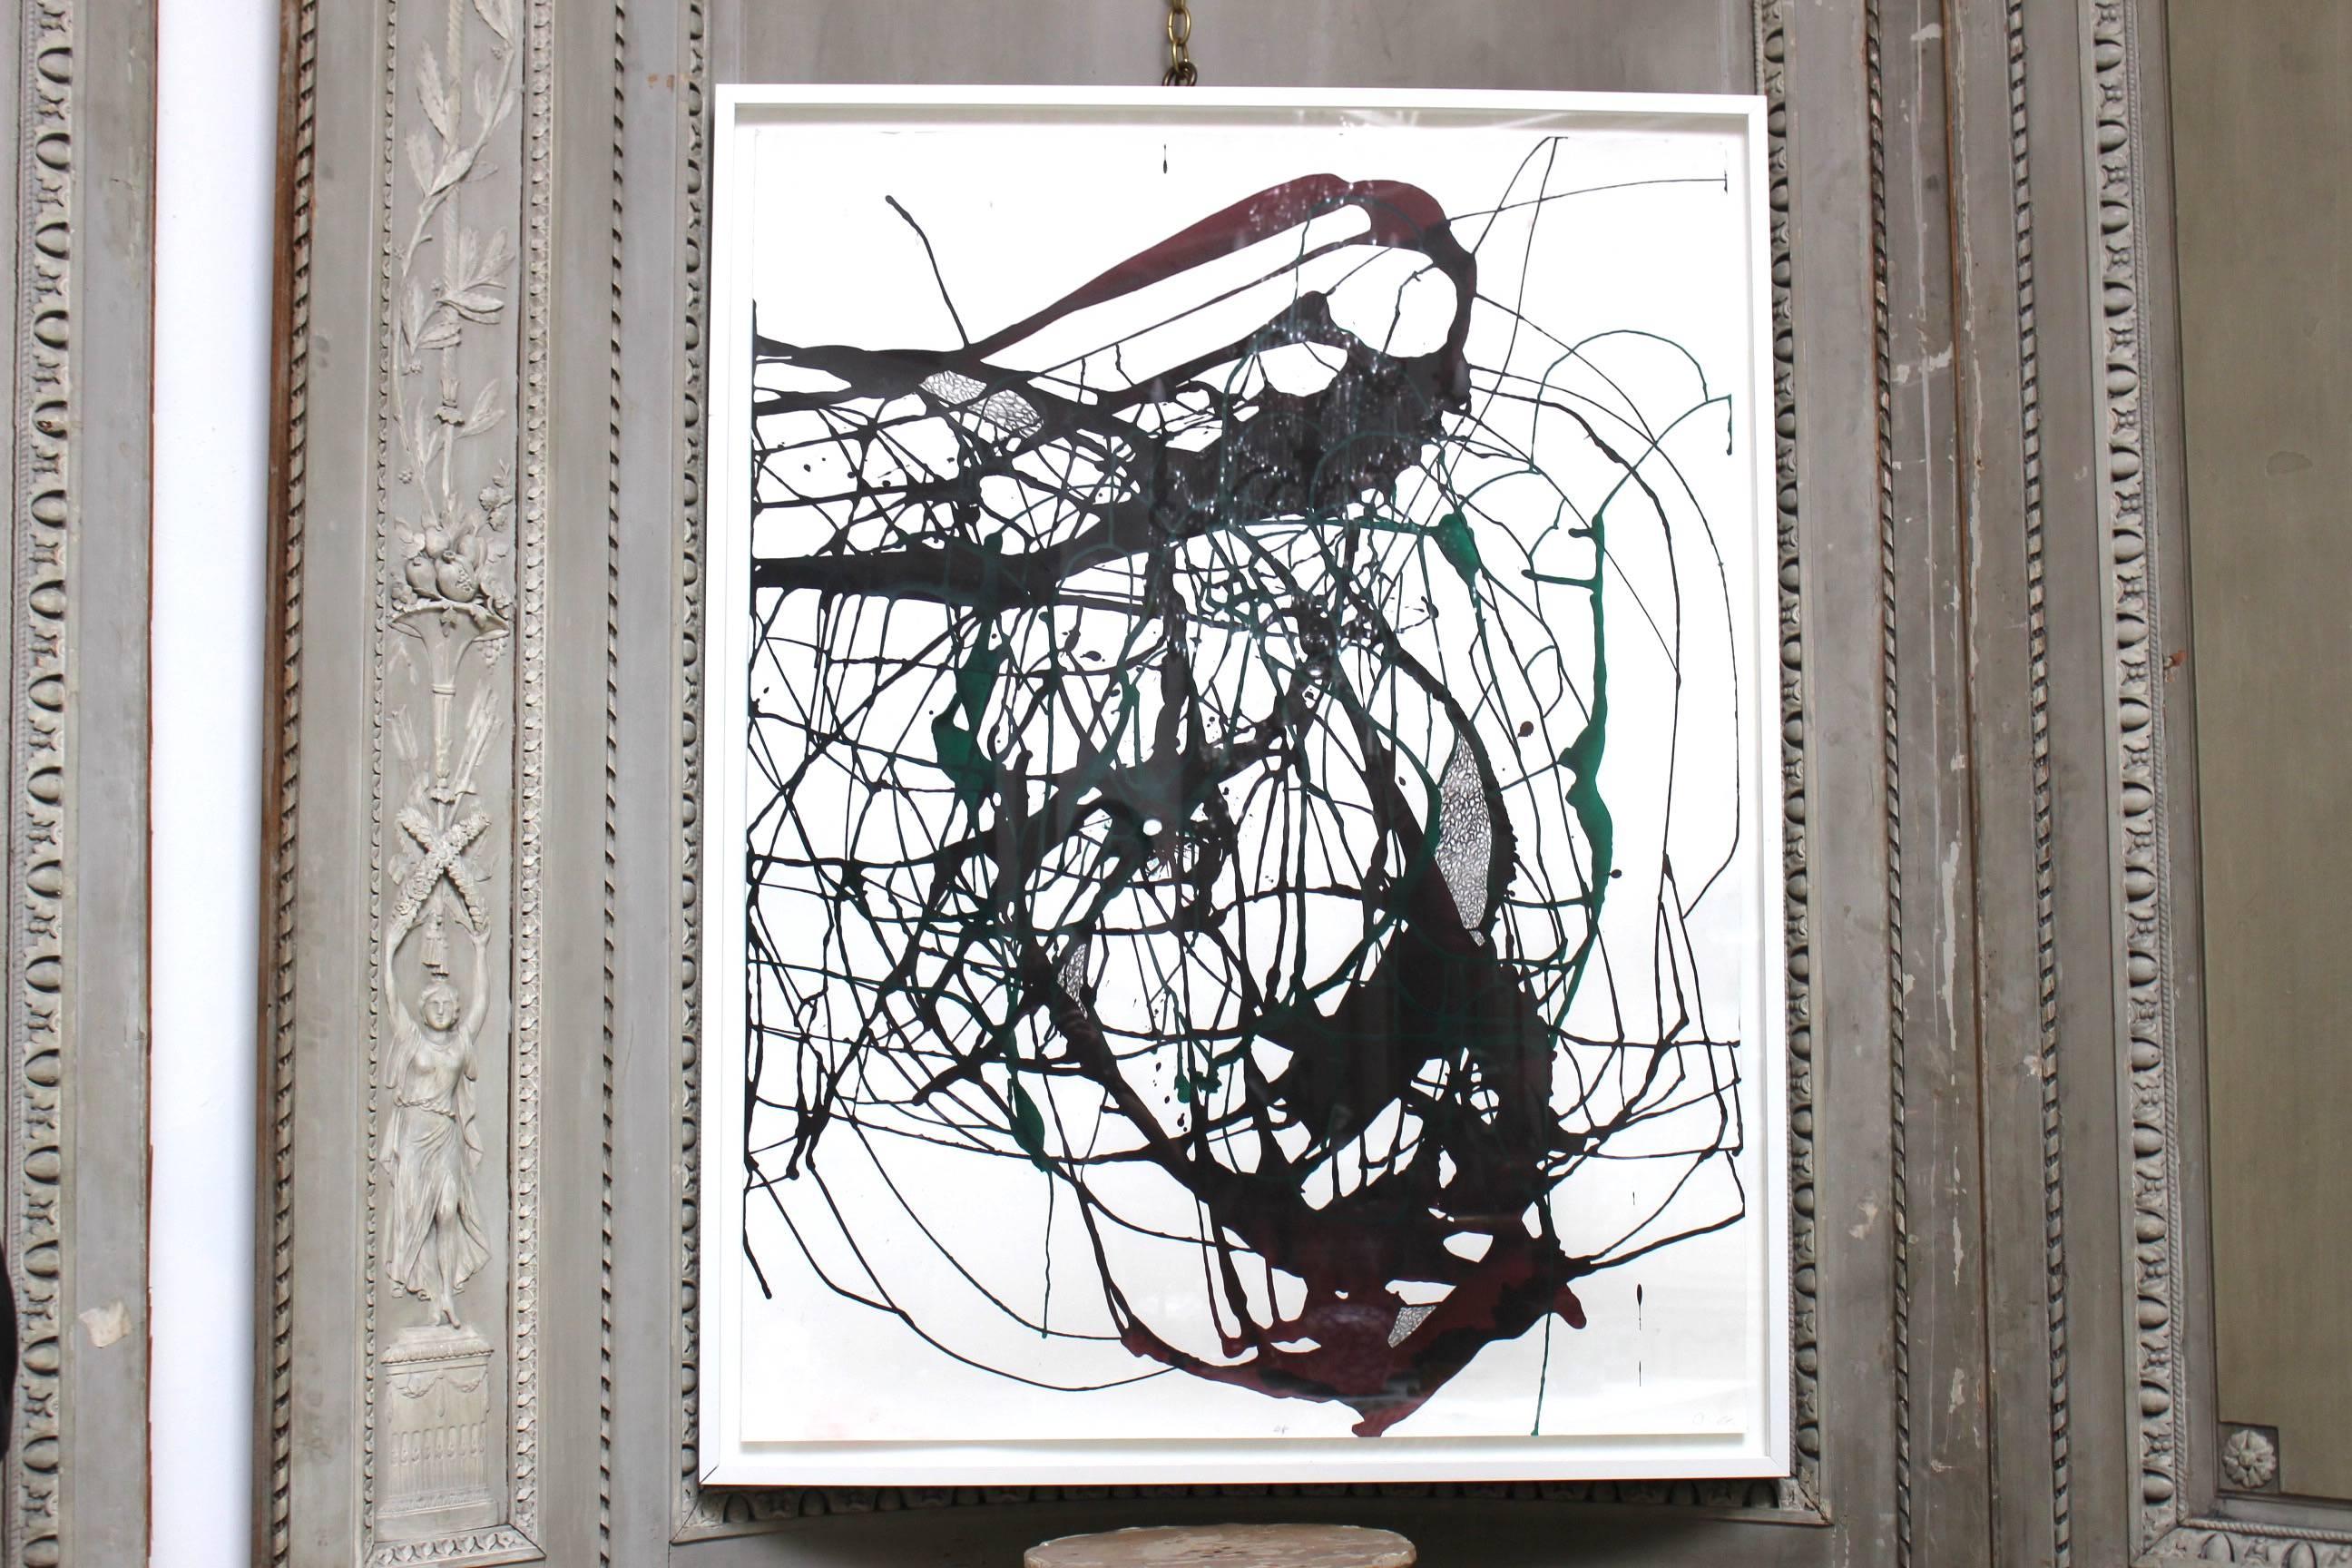 Ink, acrylic, charcoal on paper. “Untitled 2”. Framed.
Artist: Jack Cornell, Taos, New Mexico.